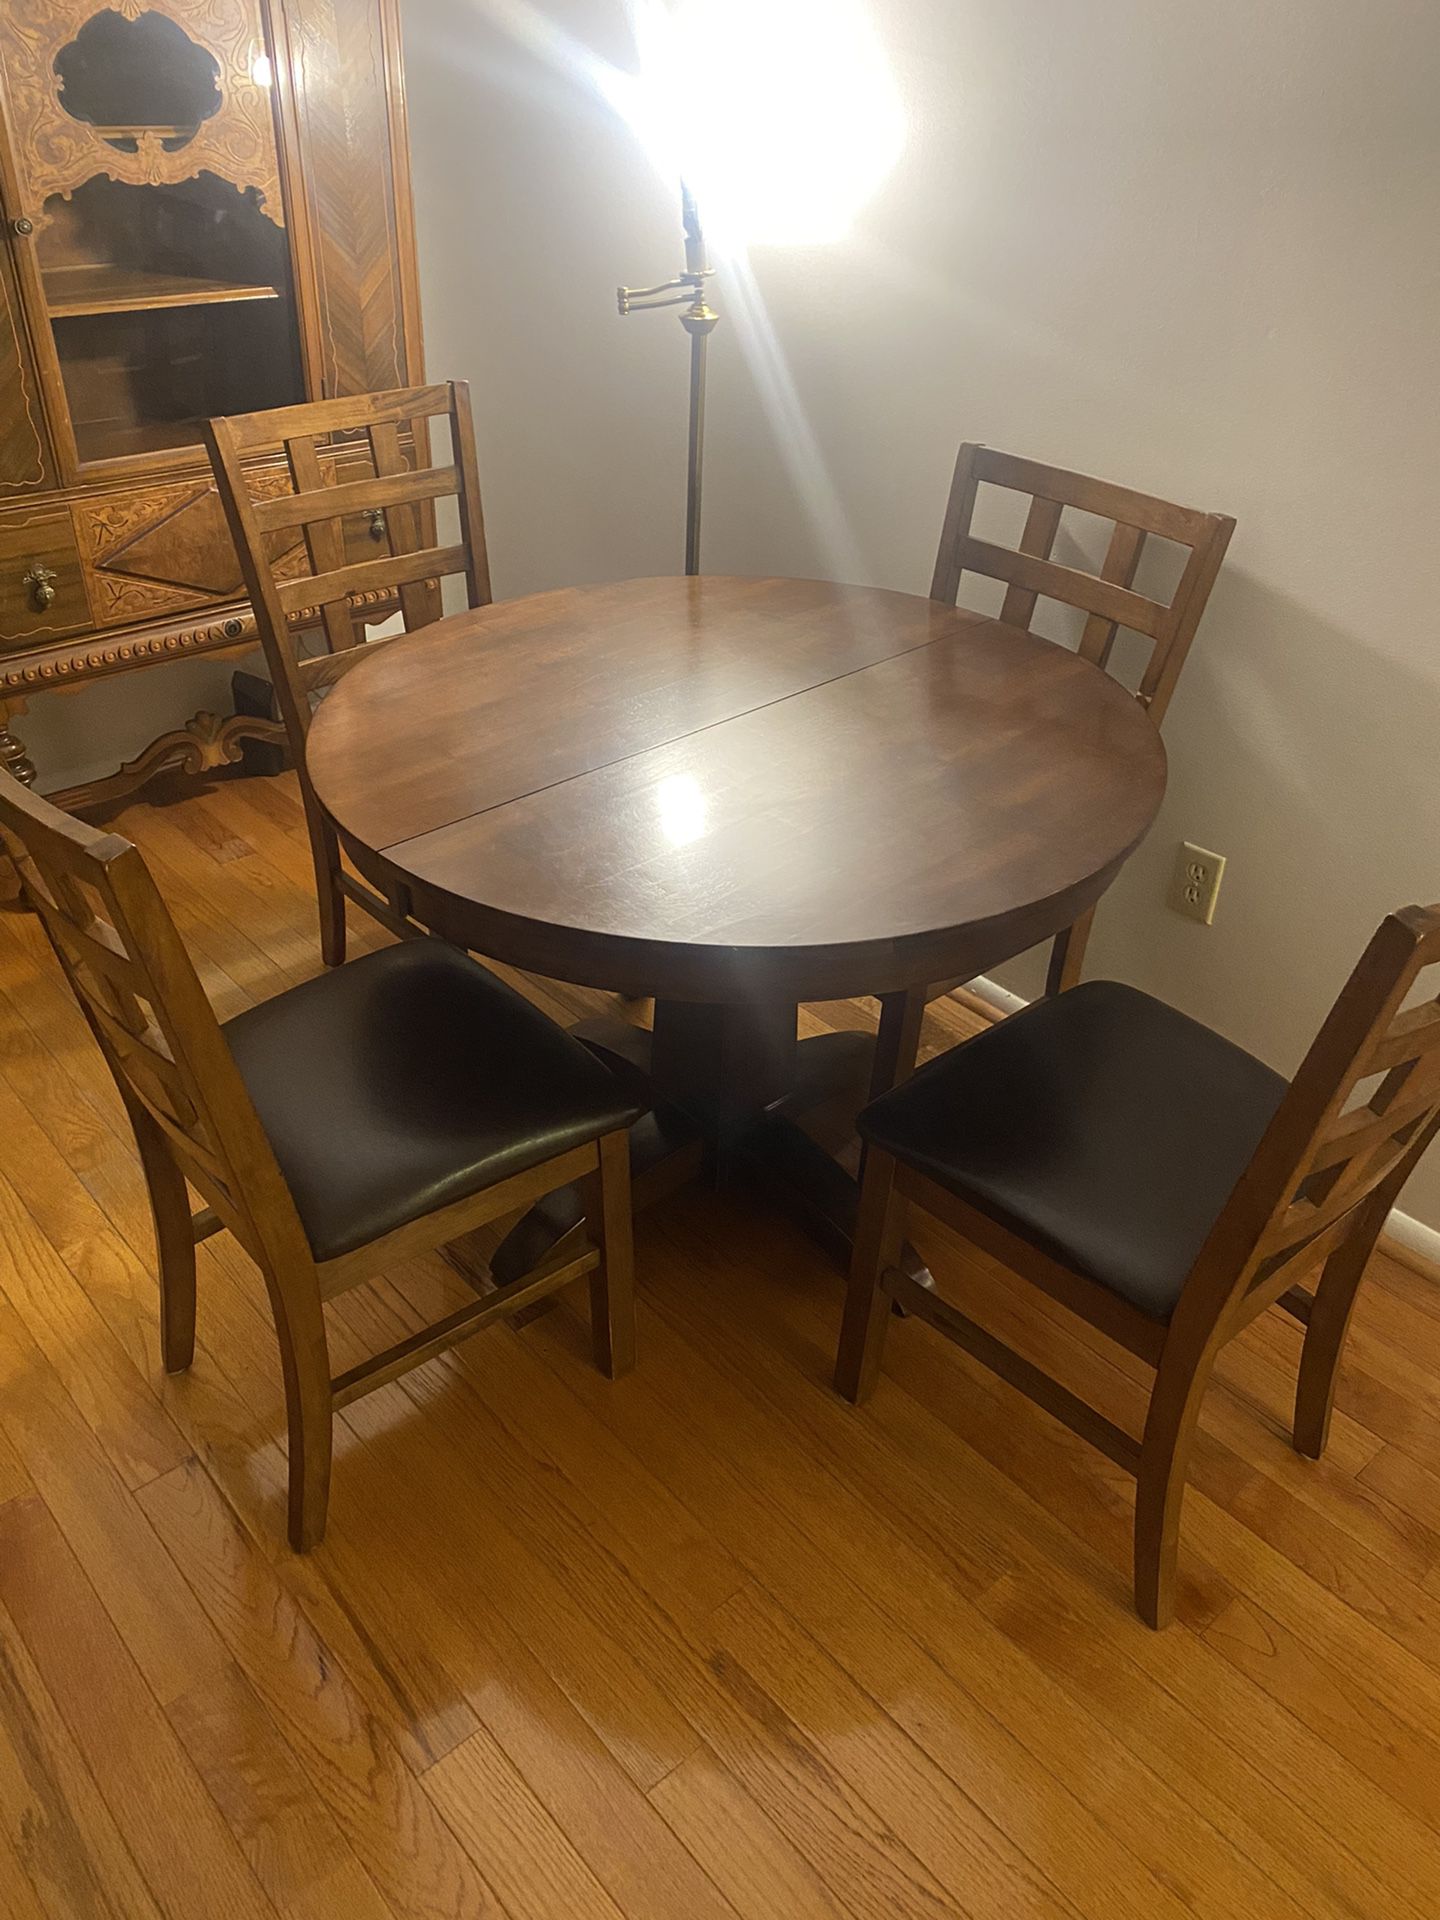 Dinning Room Table 4 Chairs Has A Center Piece Extension 